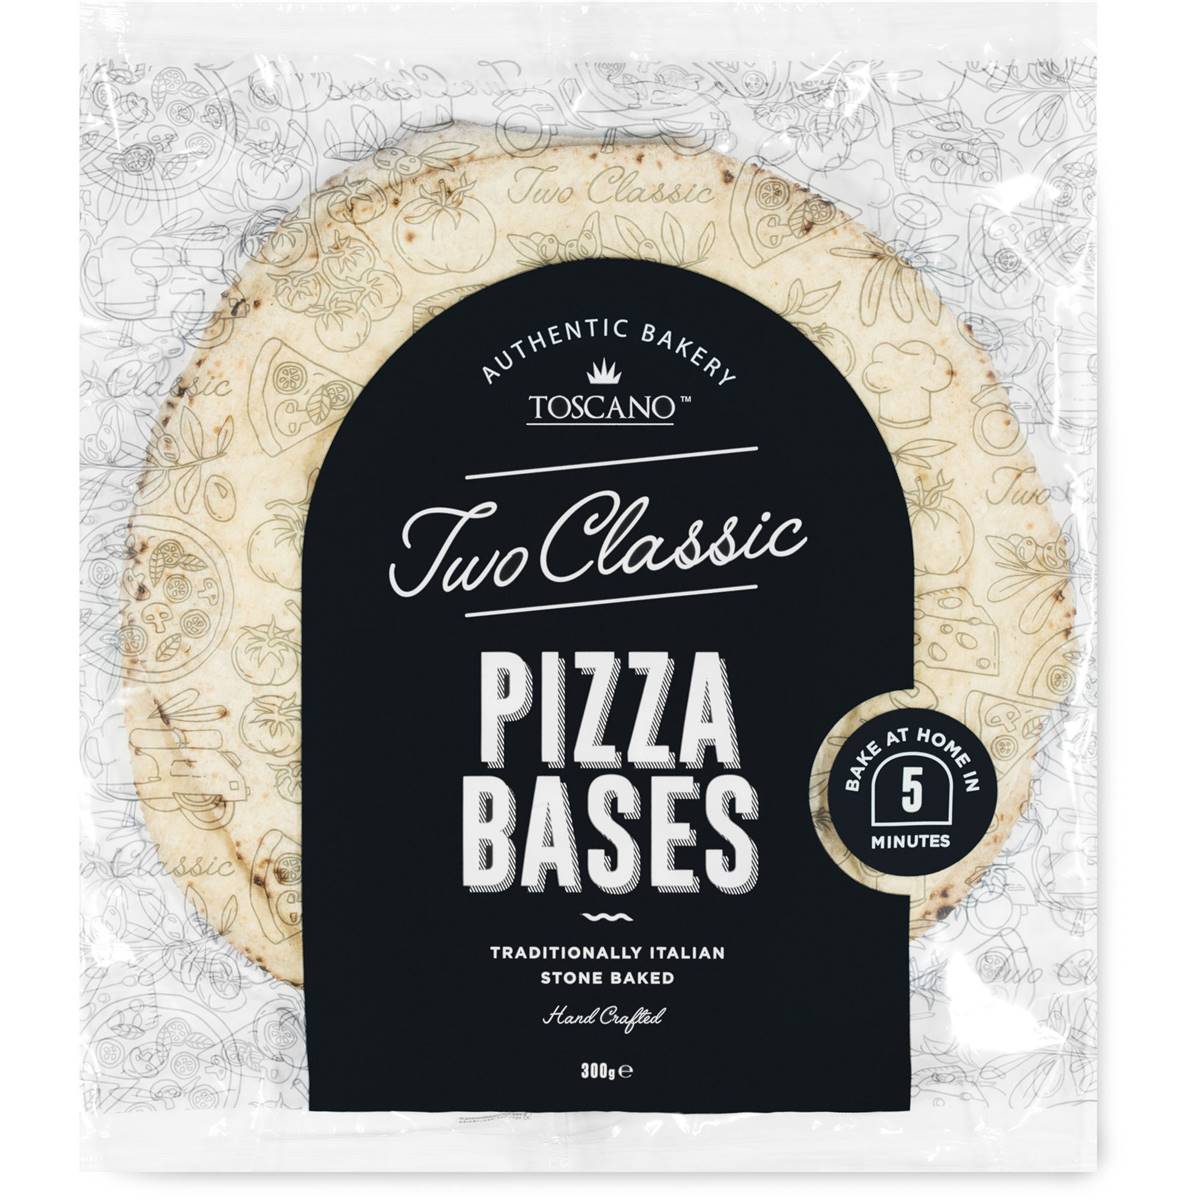 Calories in Toscano Classic Pizza Bases